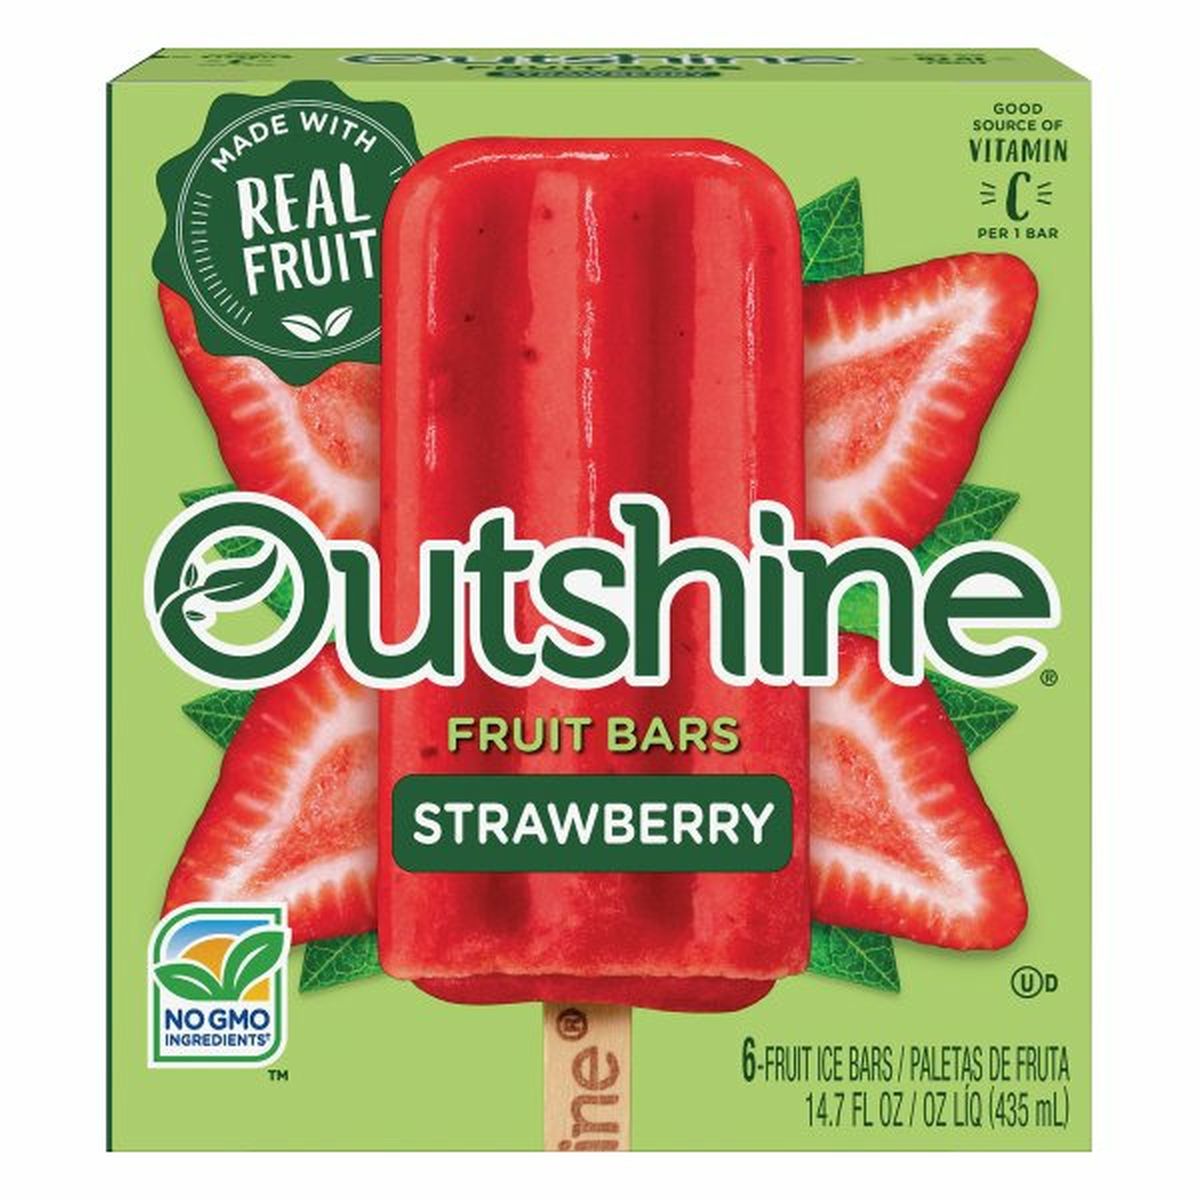 Calories in Outshine Fruit Ice Bars, Strawberry, 6 Pack